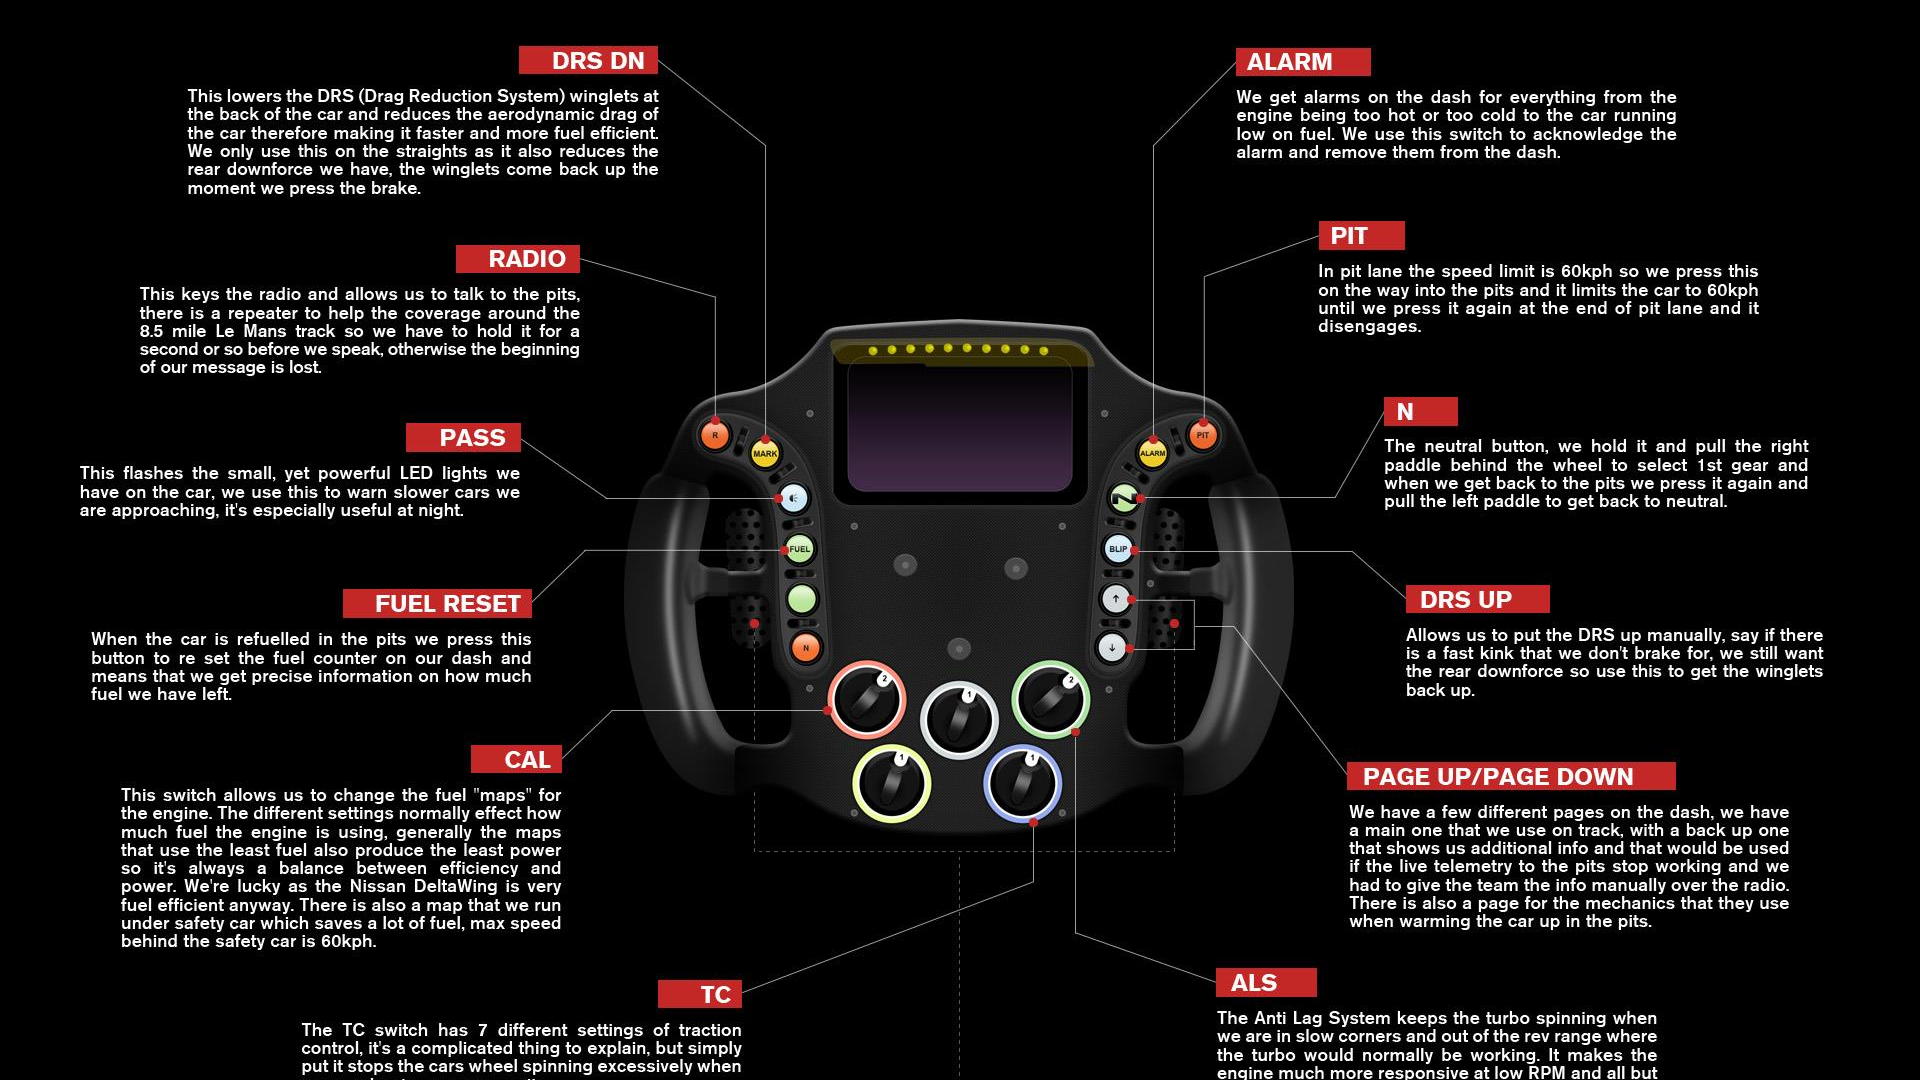 Nissan DeltaWing steering wheel explained